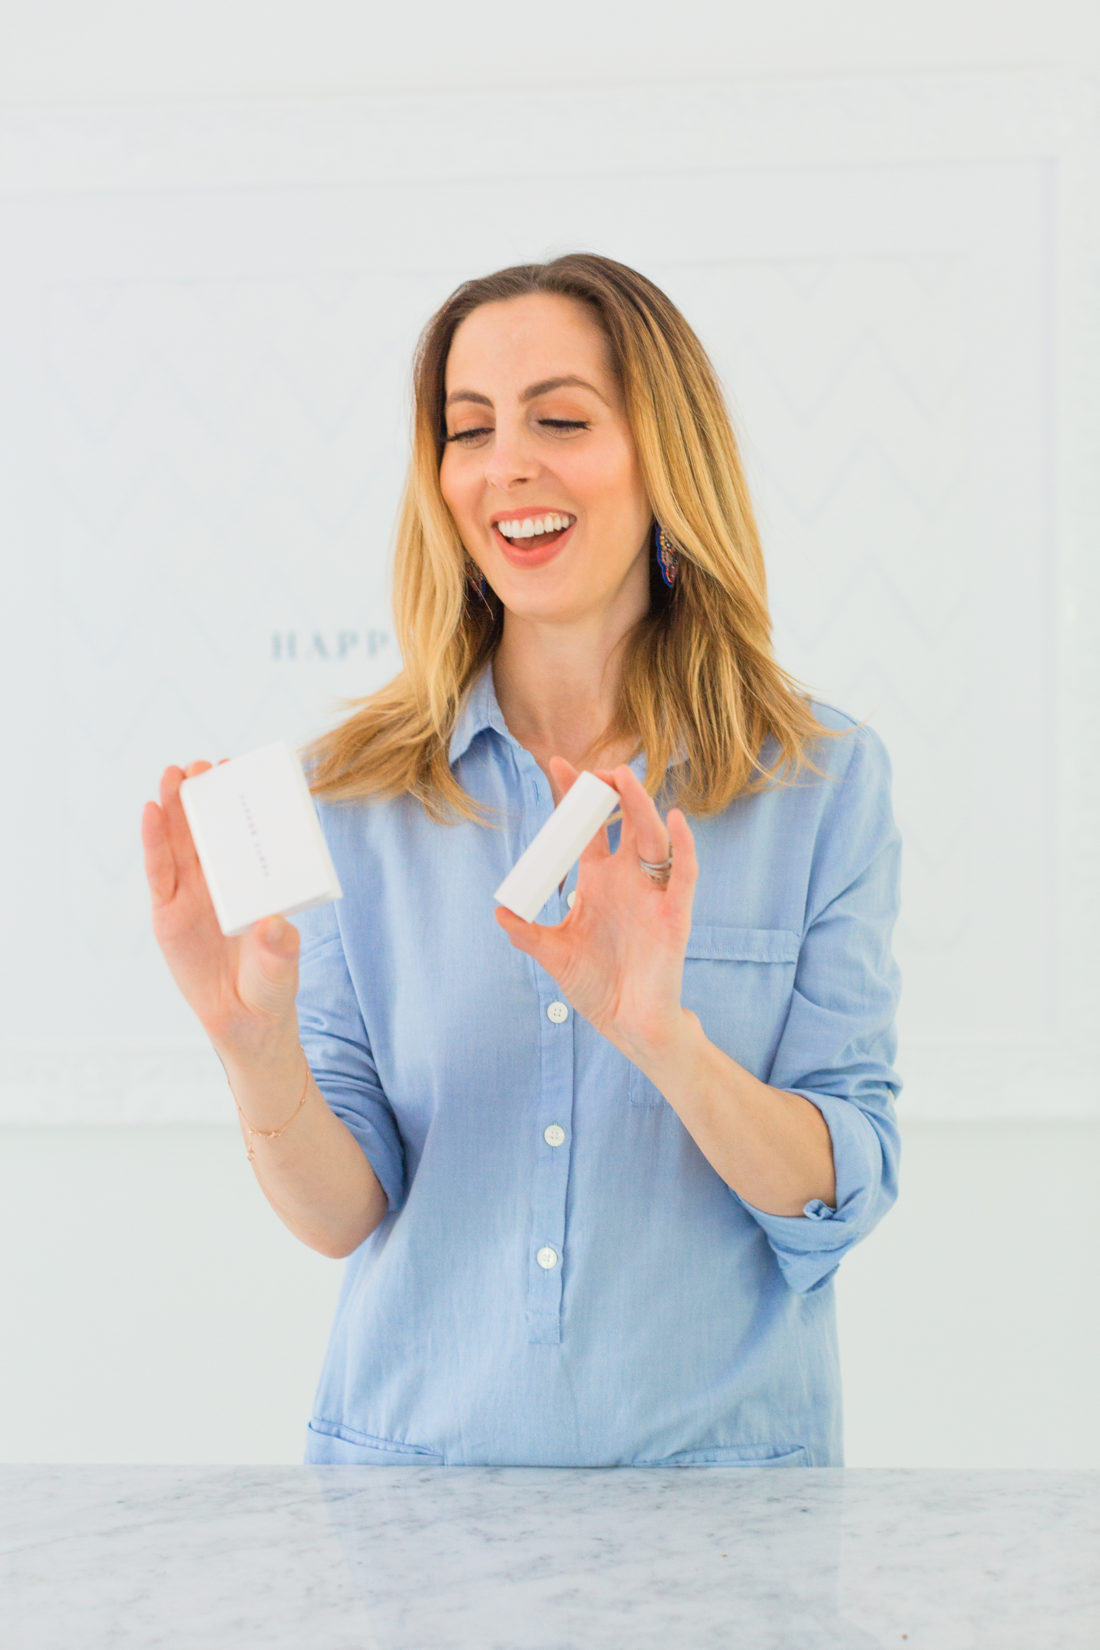 Eva Amurri Martino shows how her blotting powder case and brush case detach from one another